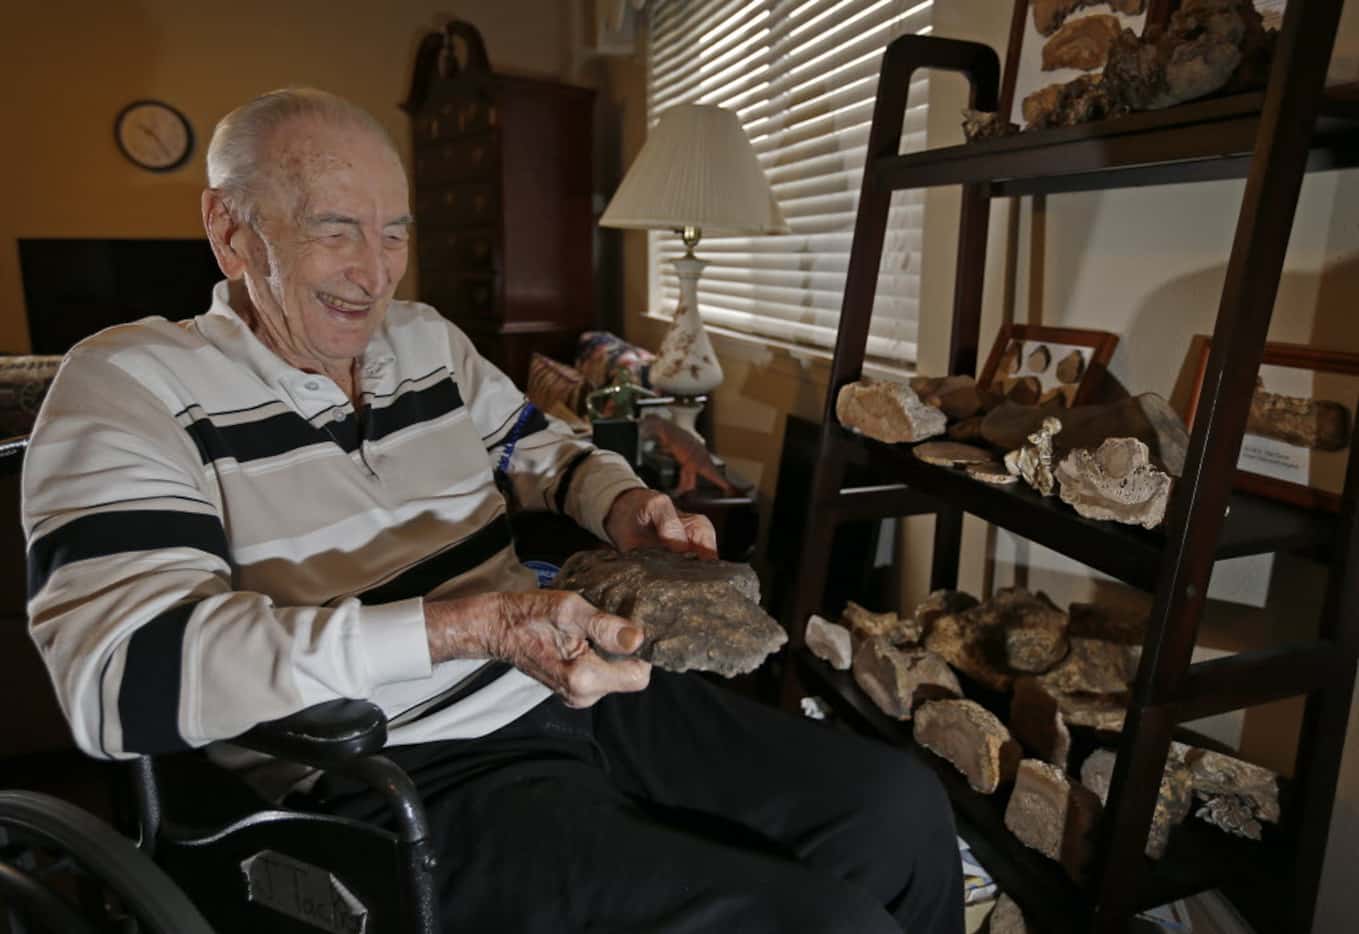 Amateur rock collector John Tackel shares his Dallas apartment with rocks he has collected.  